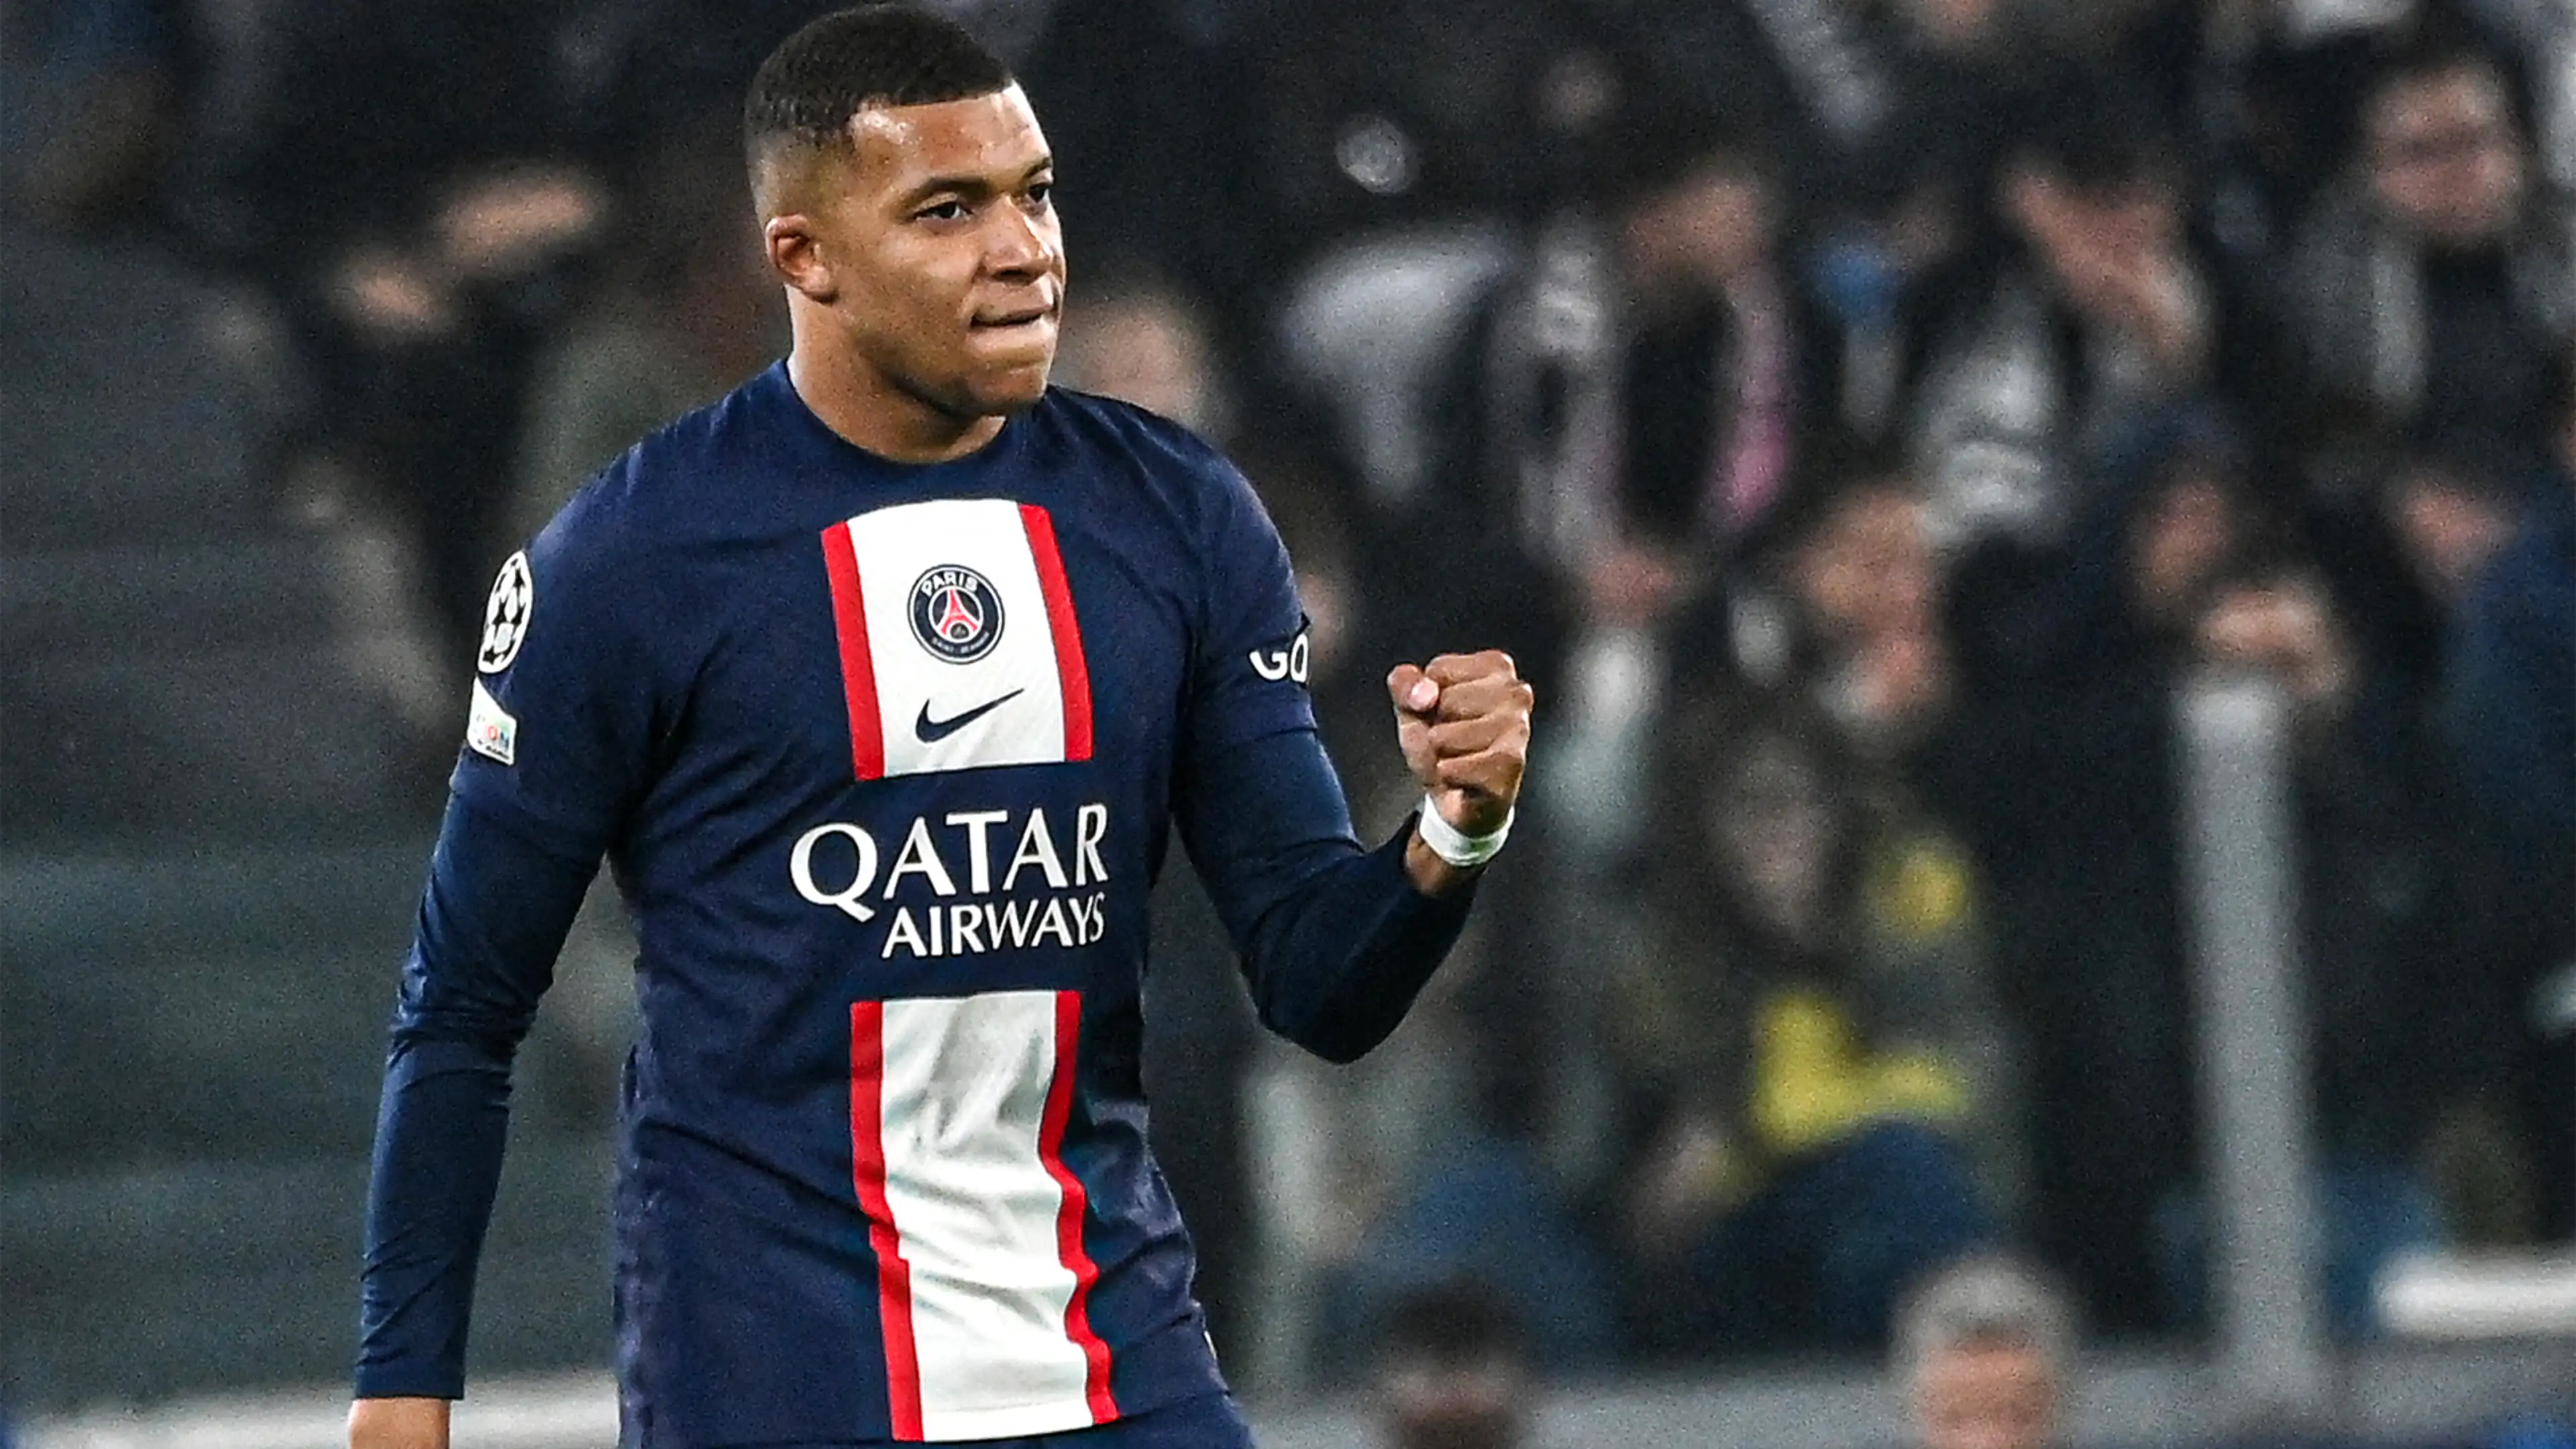 PSG Report That Mbappé Will Stay In The Team For Next Season